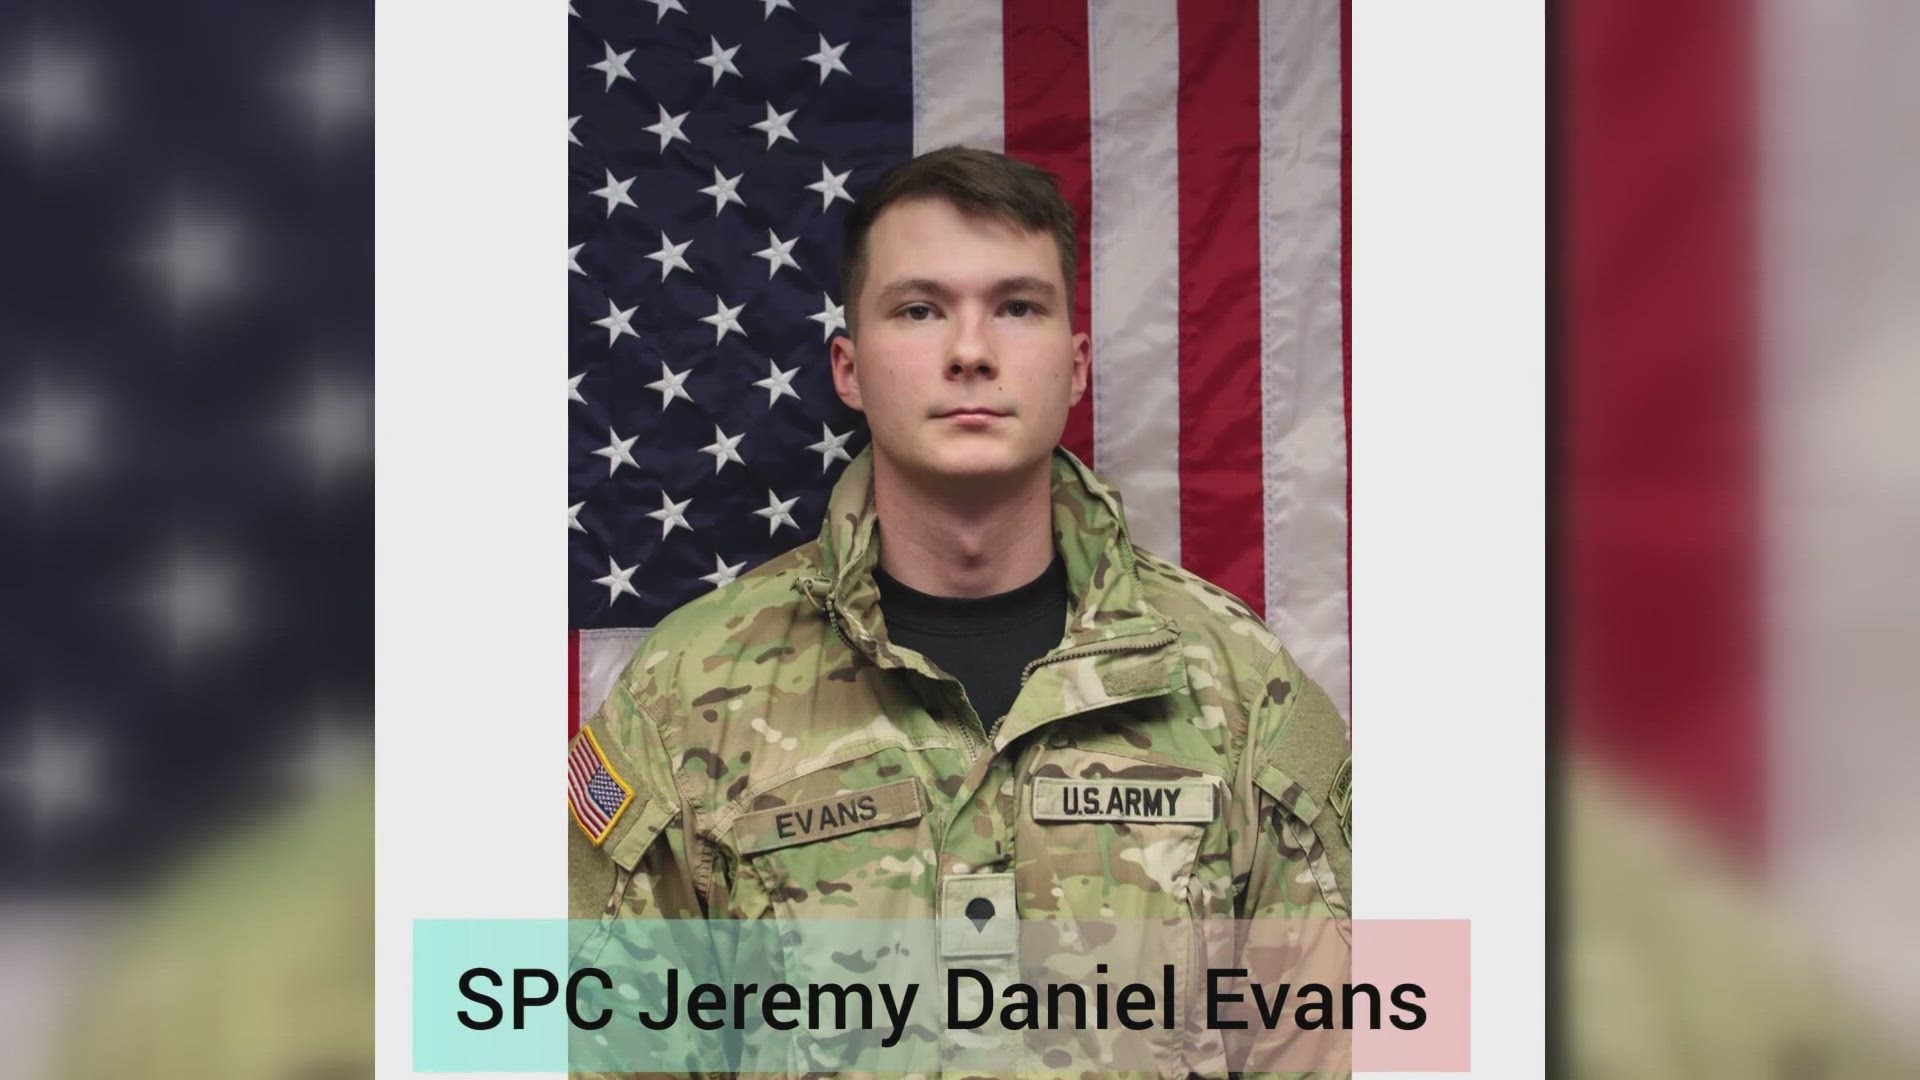 Spc. Jeremy Daniel Evans joined the Army in July 2020 and trained at Fort Moore in Georgia before arriving in Alaska in 2021.